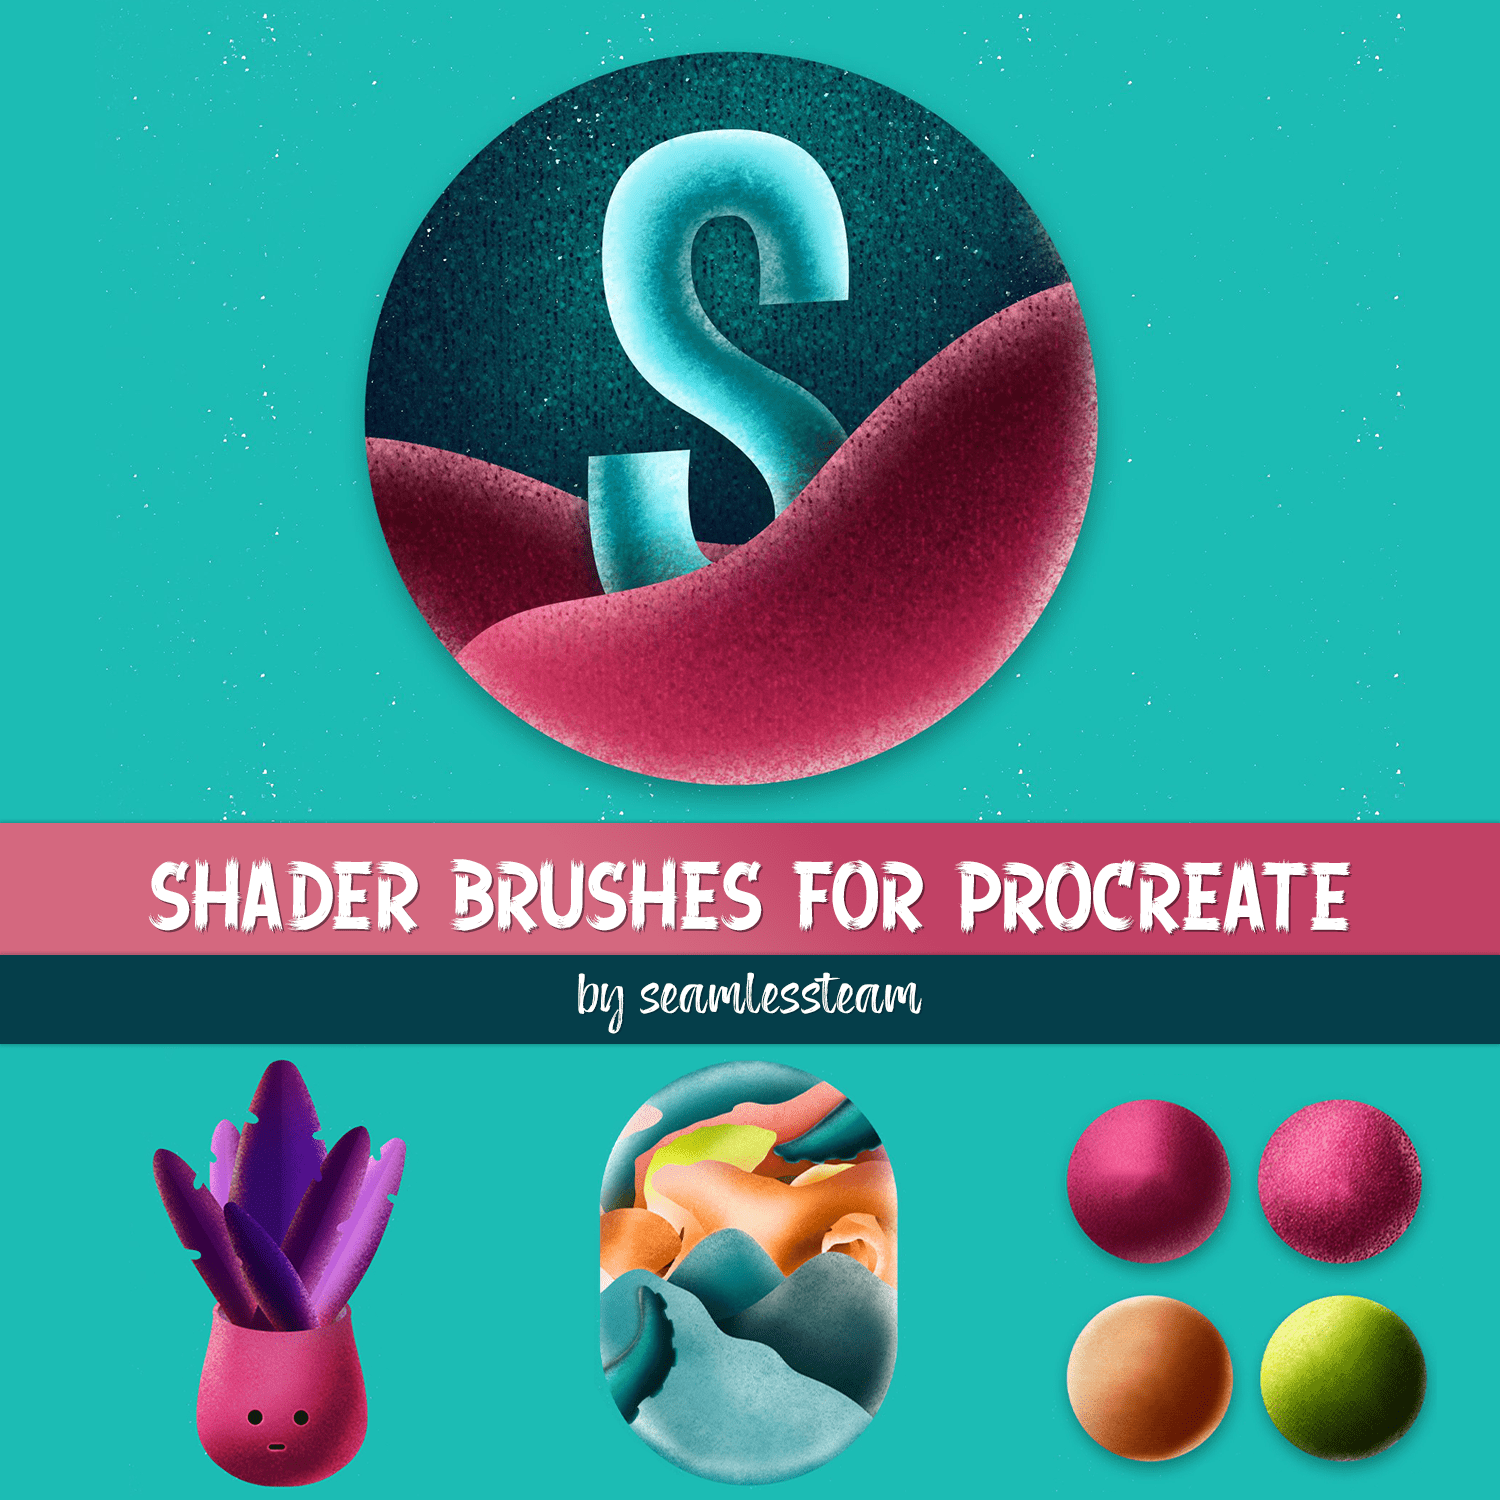 Shader Brushes For Procreate Cover.